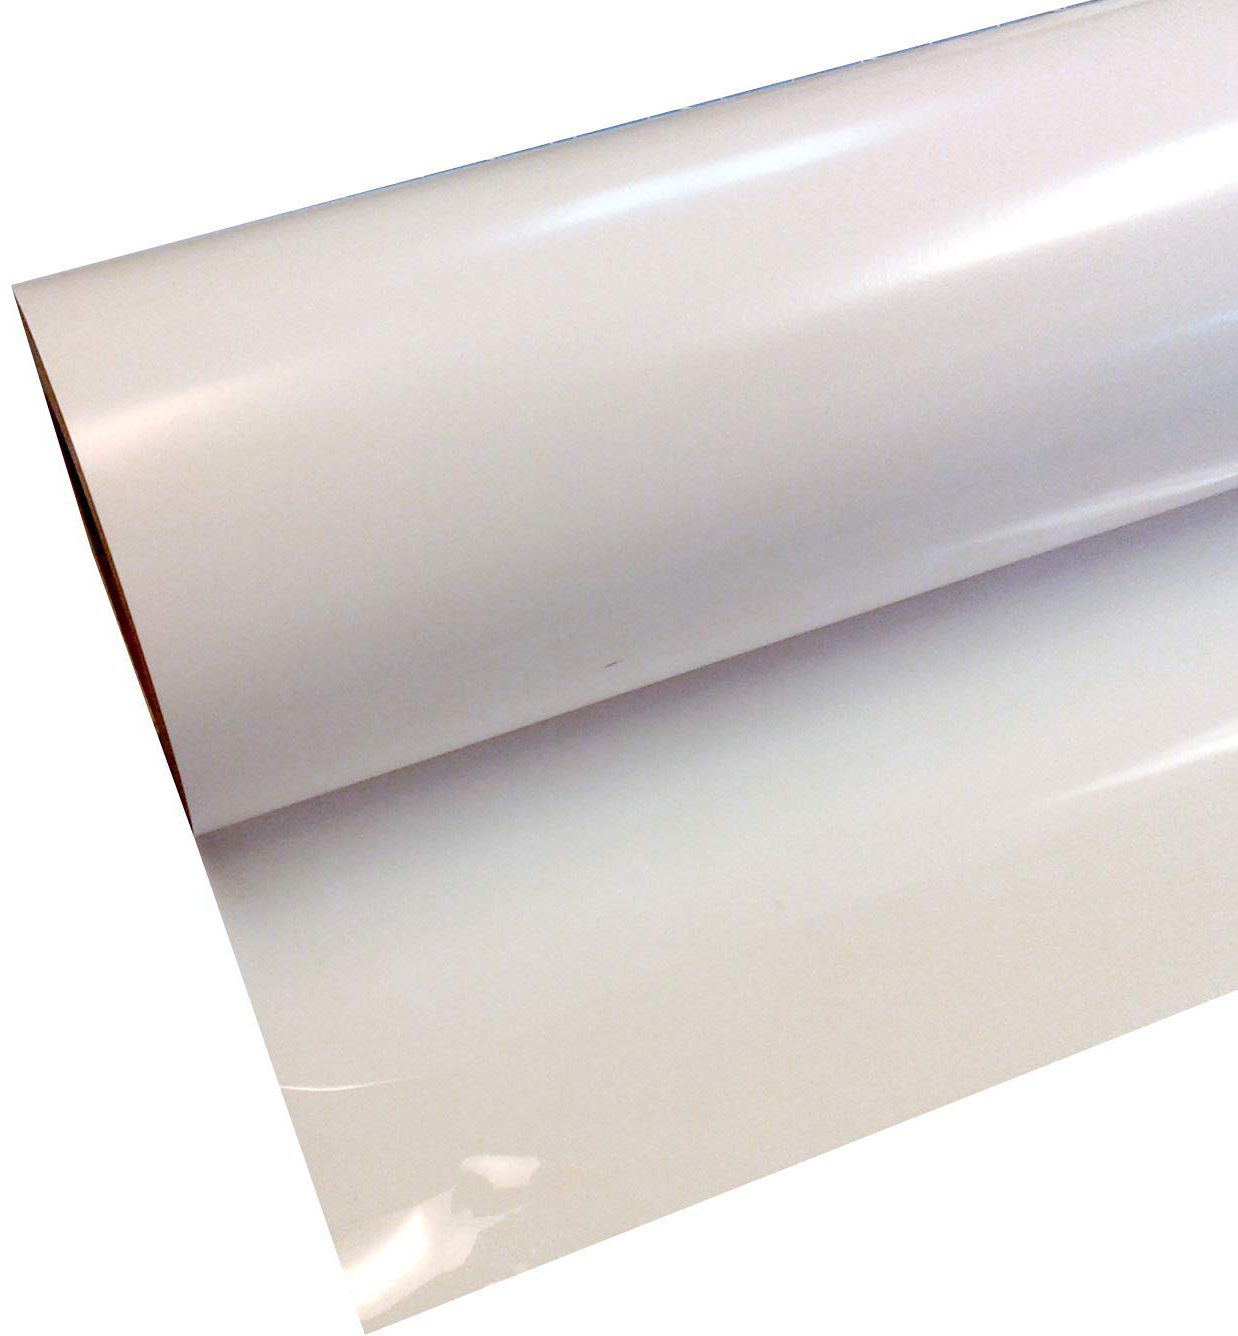 Specialty Materials ThermoFlexTURBO White - Specialty Materials ThermoFlex Turbo Heat Transfer Film